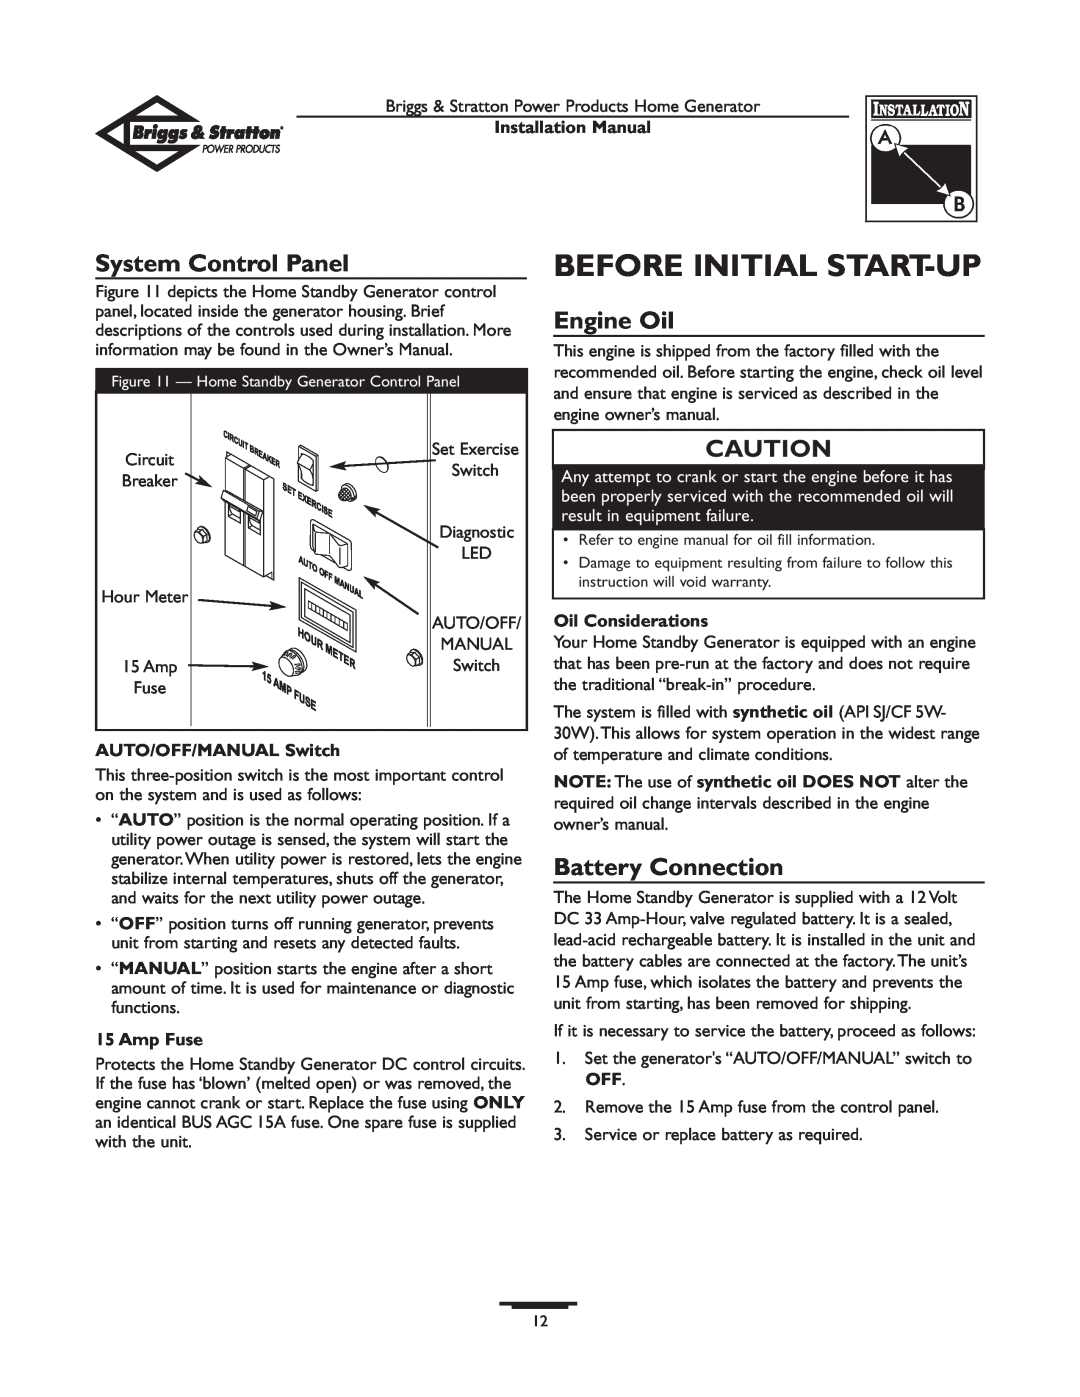 Briggs & Stratton 01938-0 manual Before Initial Start-Up, System Control Panel, Engine Oil, Battery Connection, Amp Fuse 